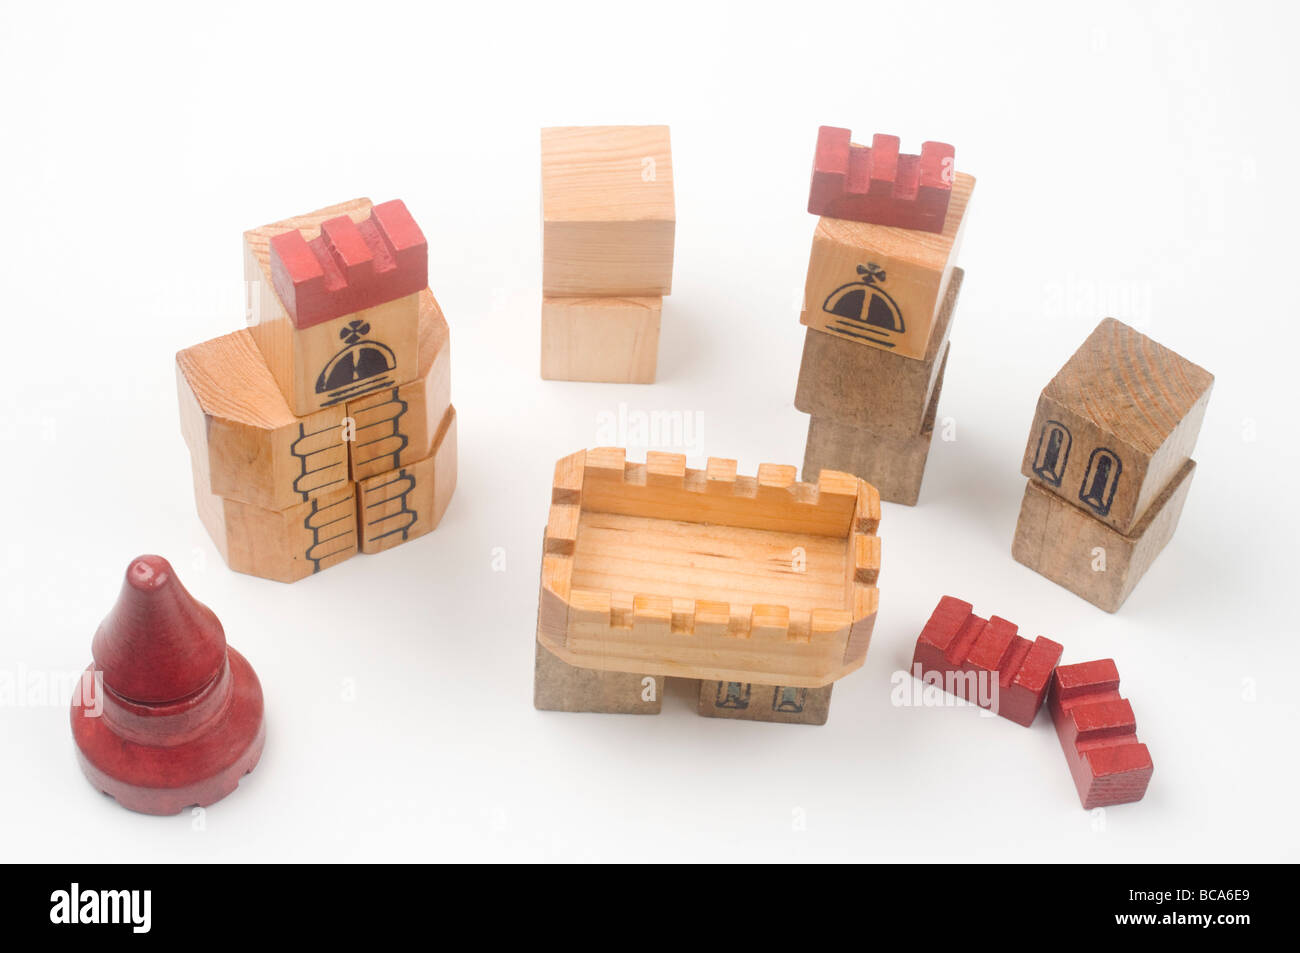 Cutout of wooden castle blocks on white background Stock Photo